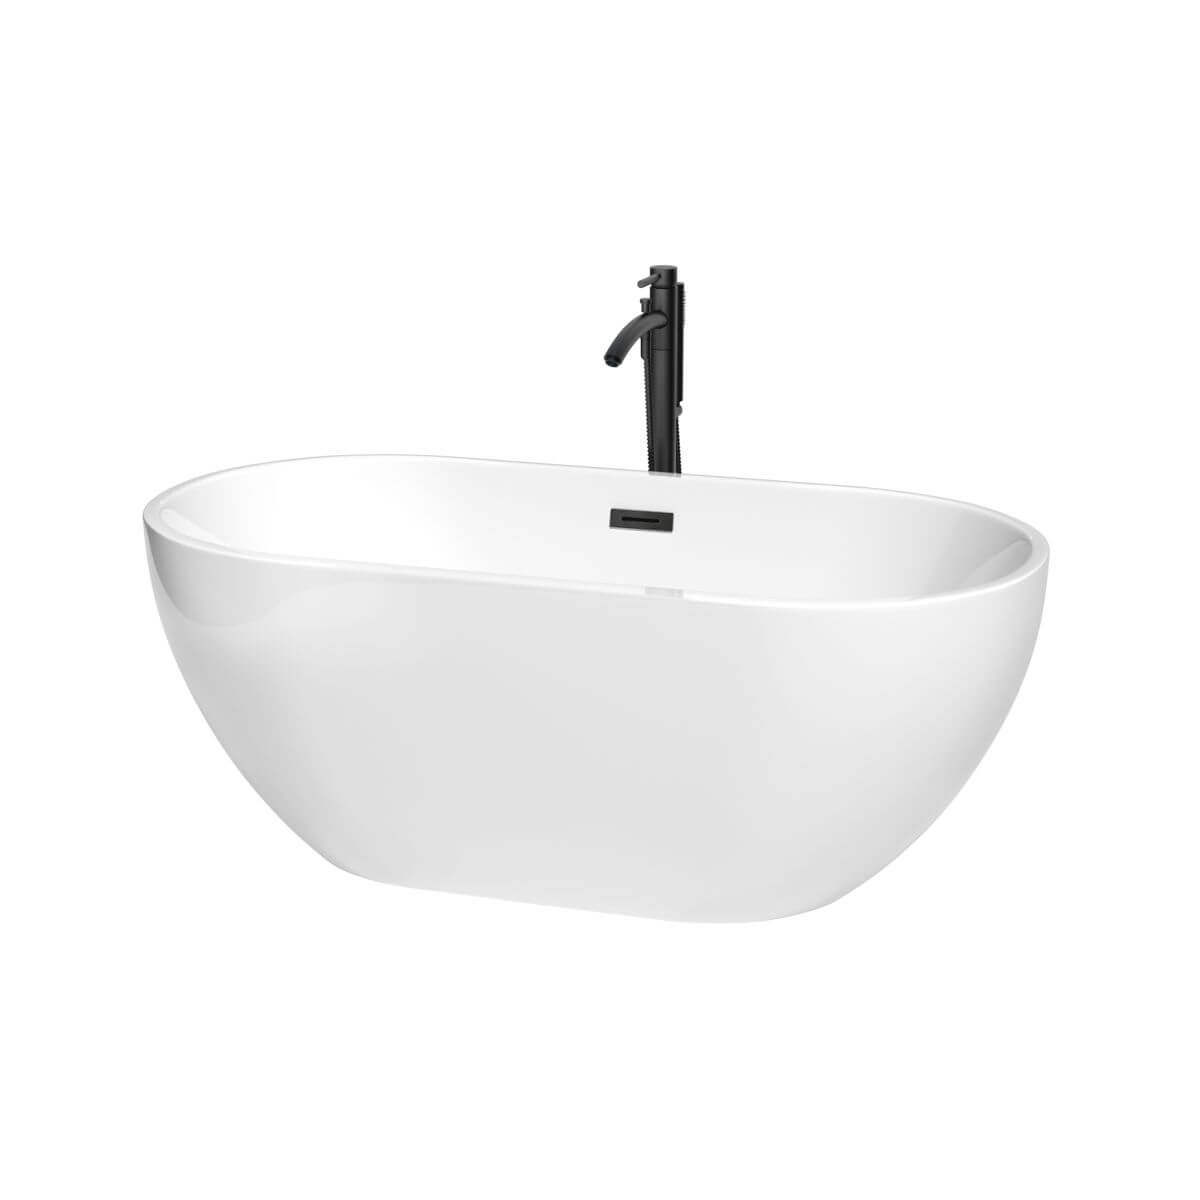 Wyndham Collection Brooklyn 60 inch Freestanding Bathtub in White with Floor Mounted Faucet, Drain and Overflow Trim in Matte Black - WCOBT200060MBATPBK